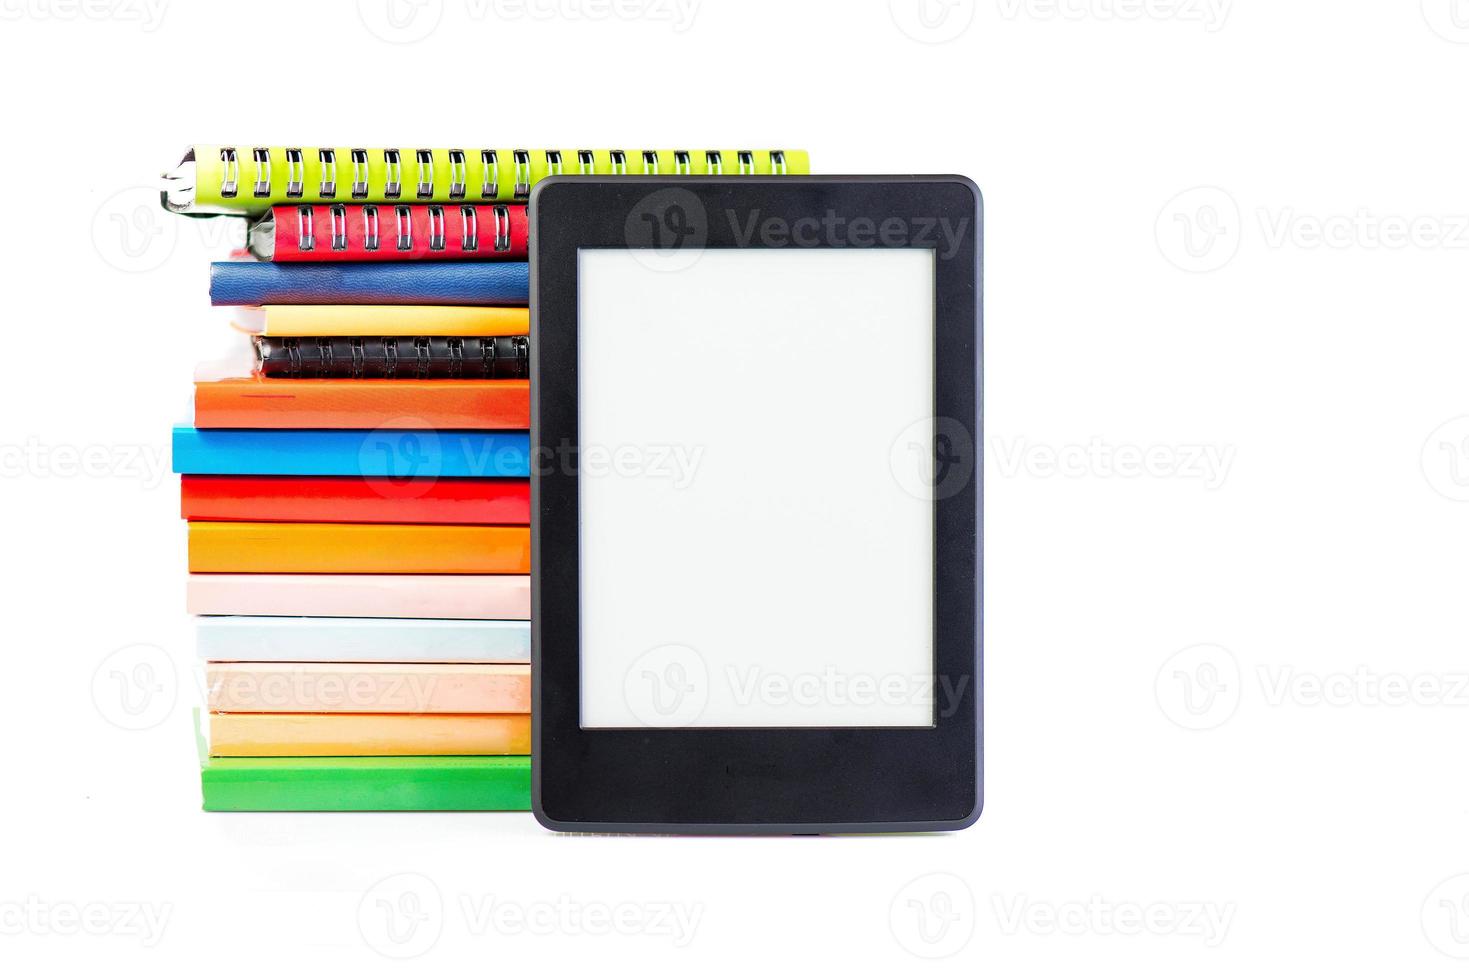 Ebook together with classic paper books and agendas concept of new technology photo